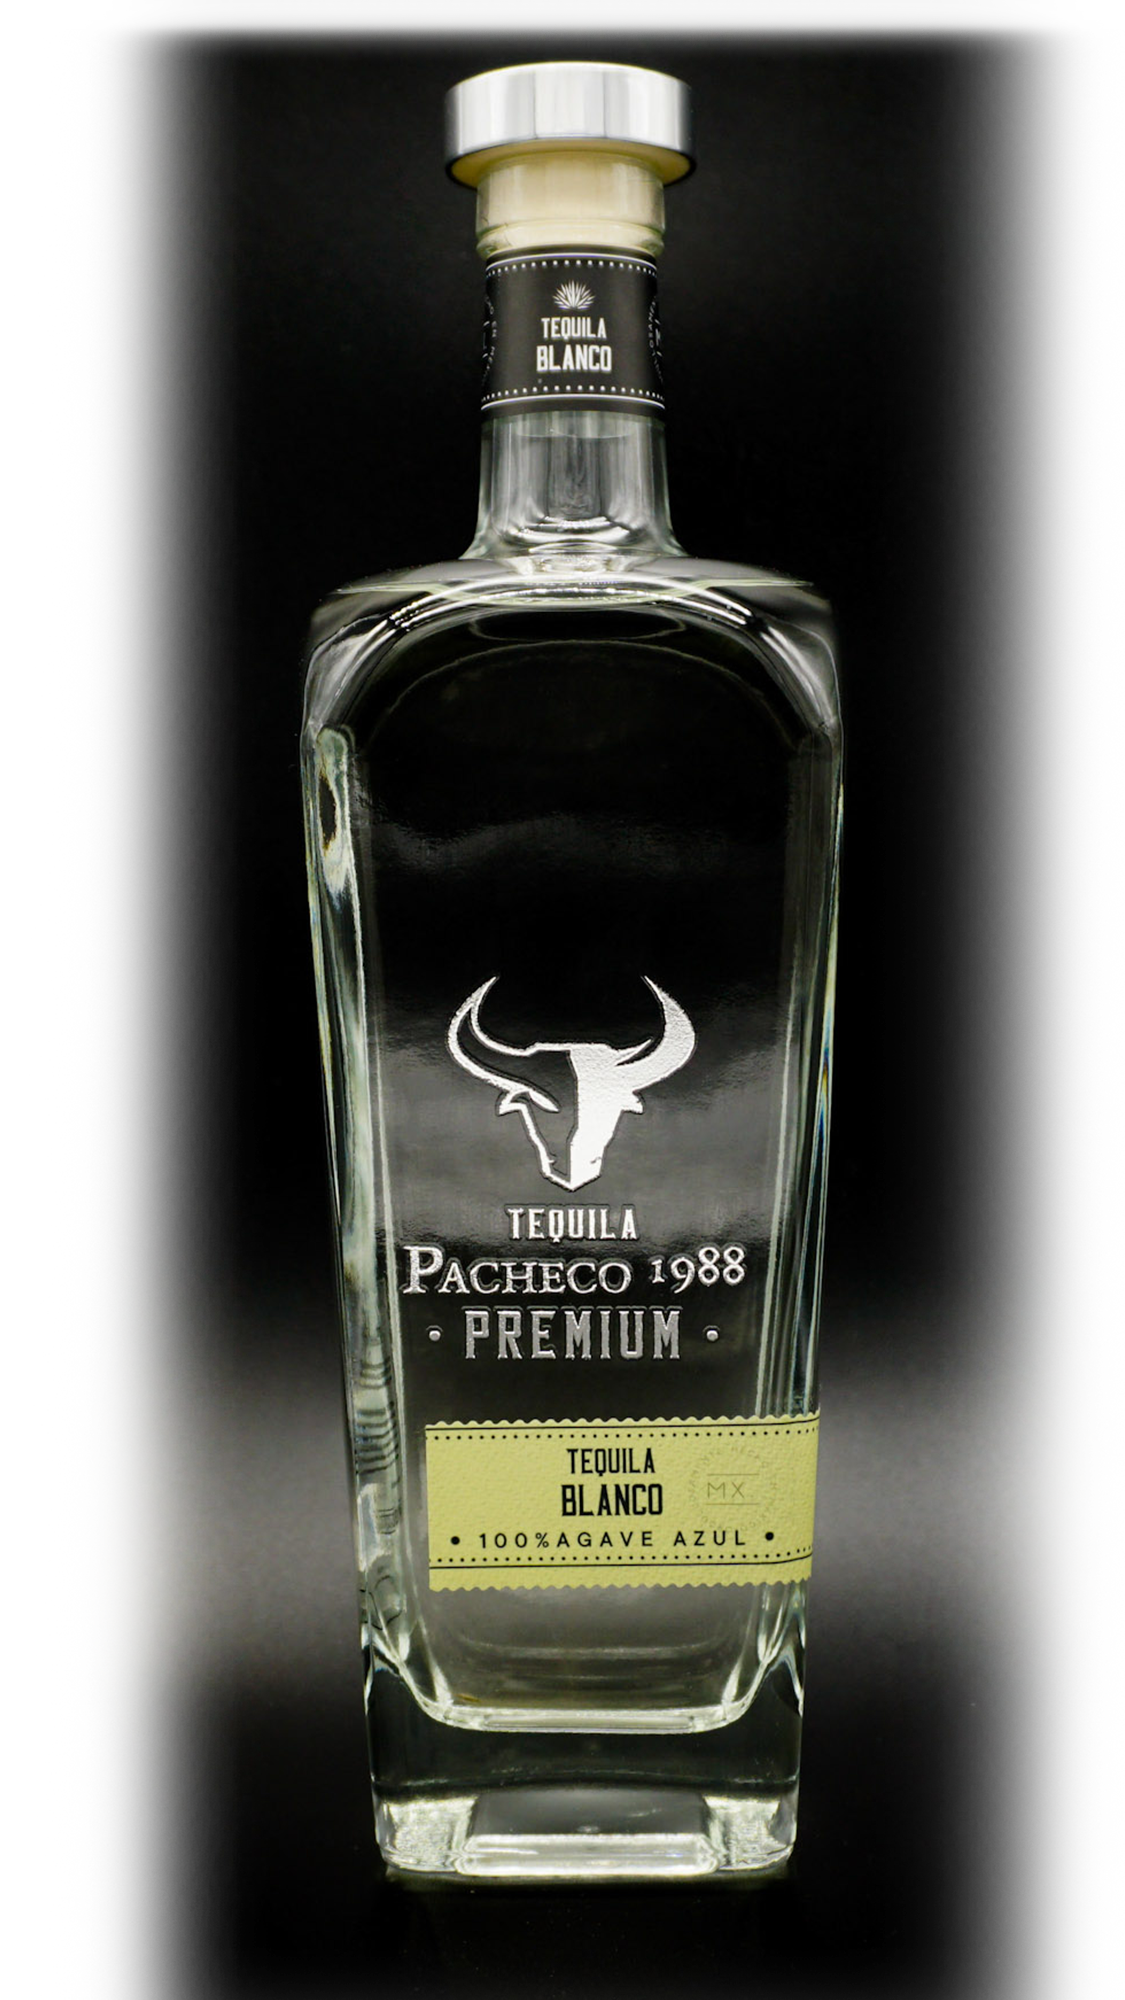 tequila_pacheco-pacheco_tequila-tequila_blanco-award-medall-awarded_tequila-silver_medall-san_francisco_world_spirits_competition 2022tequila_pacheco-pacheco_tequila-tequila_blanco-award-medall-awarded_tequila-silver_medall-san_francisco_world_spirits_competition 2022